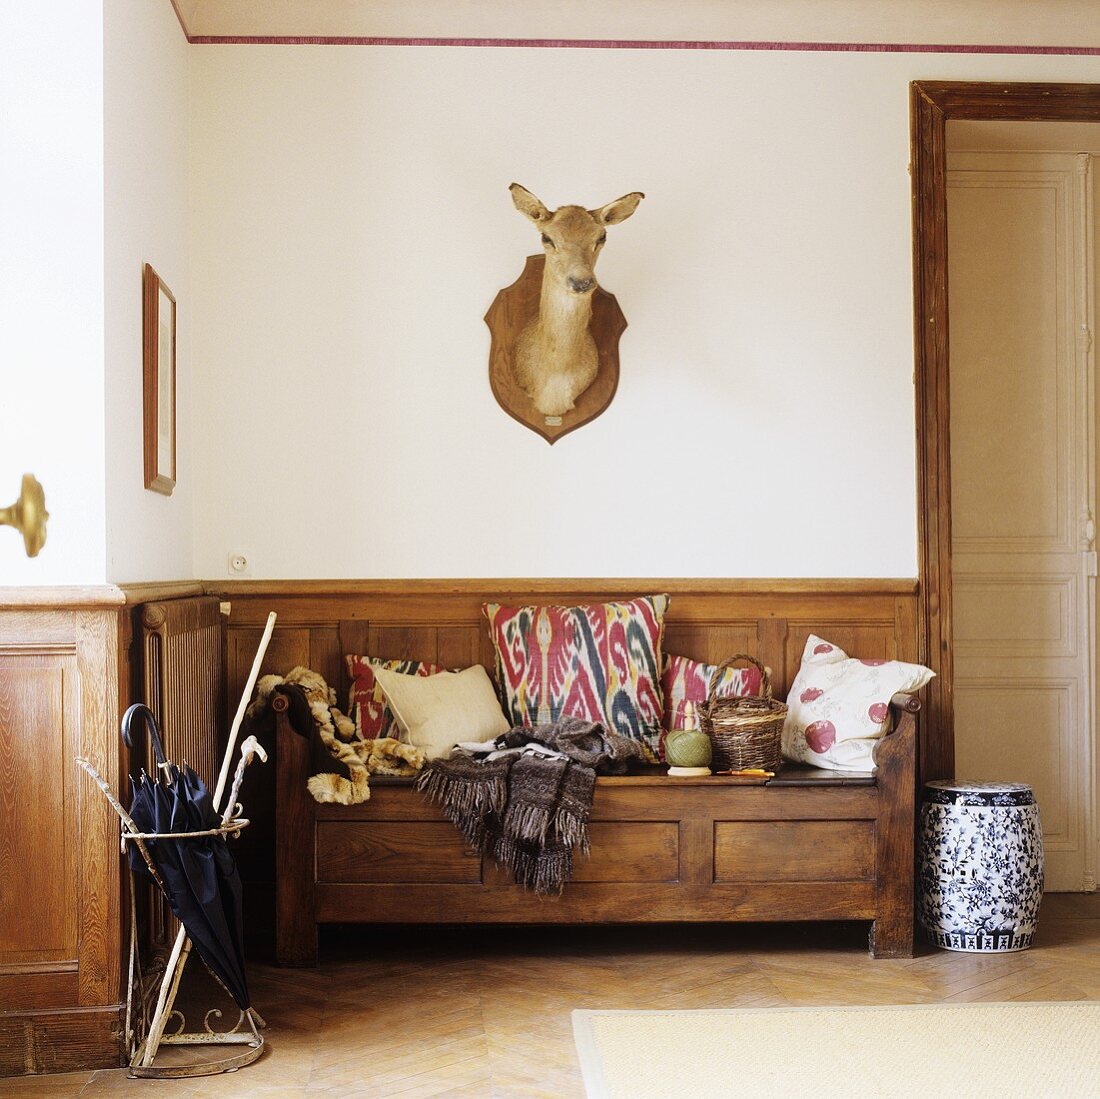 An anteroom in a country house - a wooden bench with wood panelling and an animal head on the wall